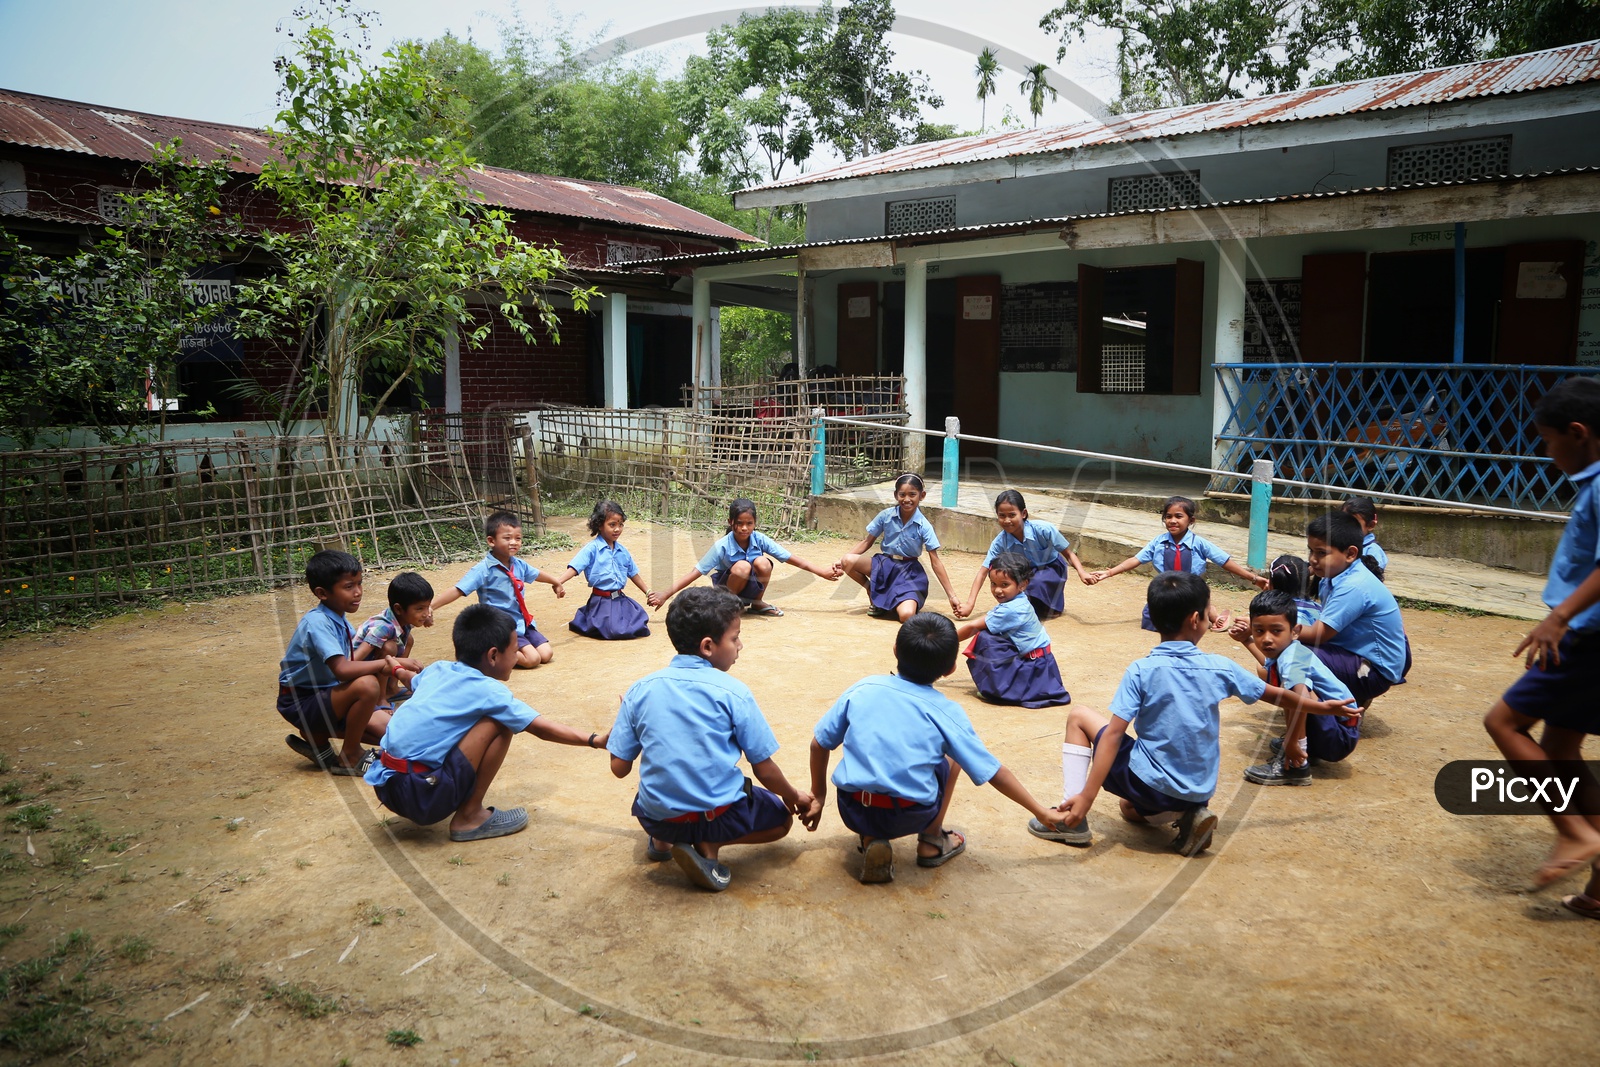 School Children Or School Students Wearing Uniforms With Happily Smiling Faces  Playing In  A School Premise Or Compound